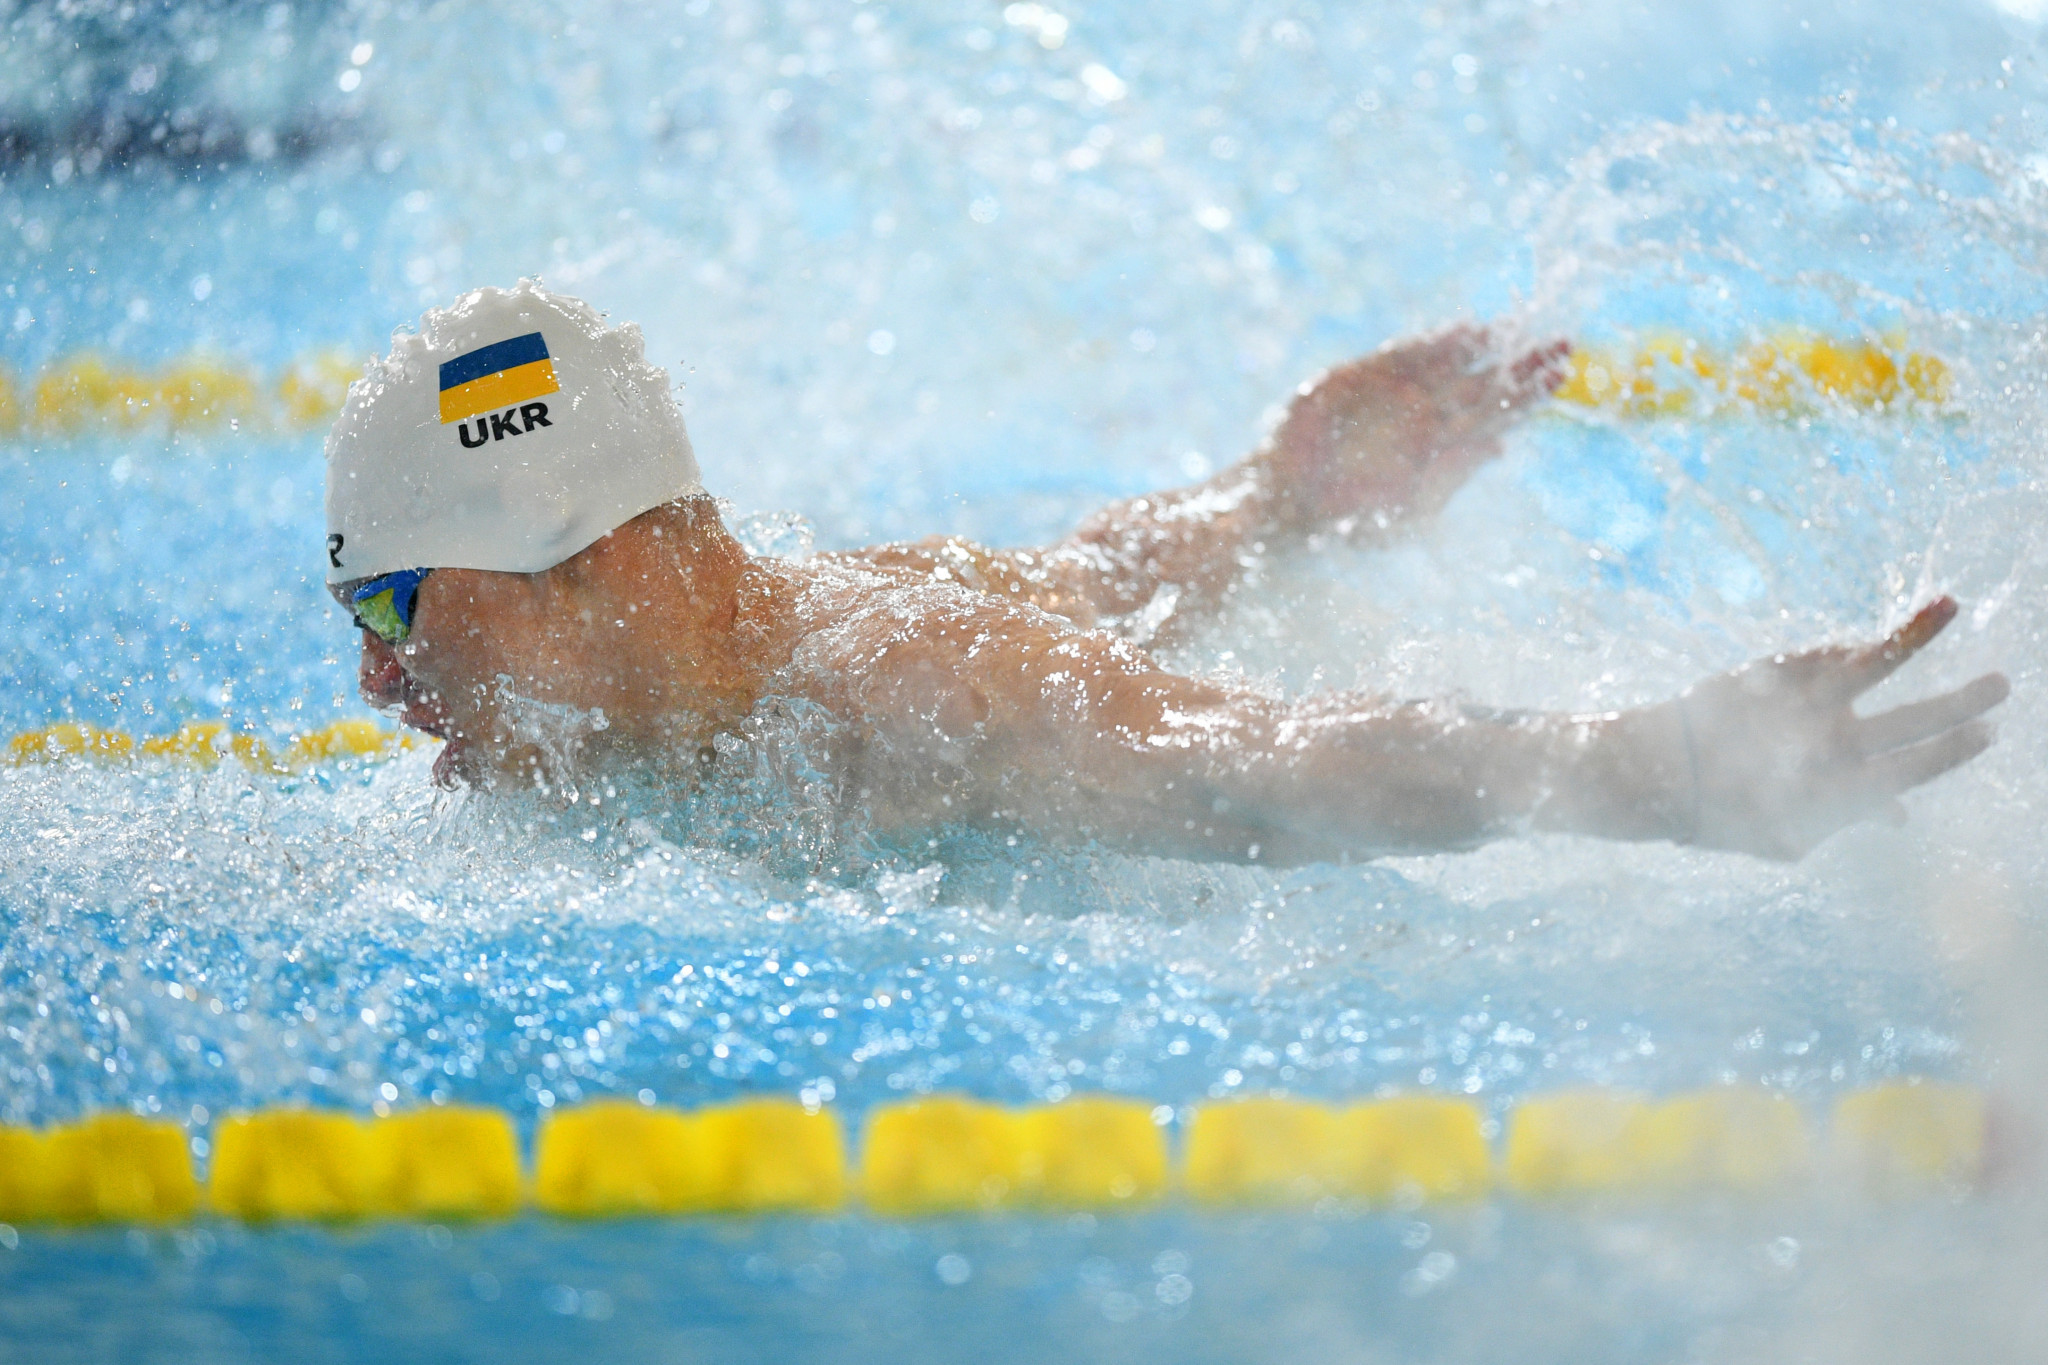 Andrii Trusov of Ukraine set a World Championships record of 28.92 in the men's S7 50m butterfly ©Getty Images